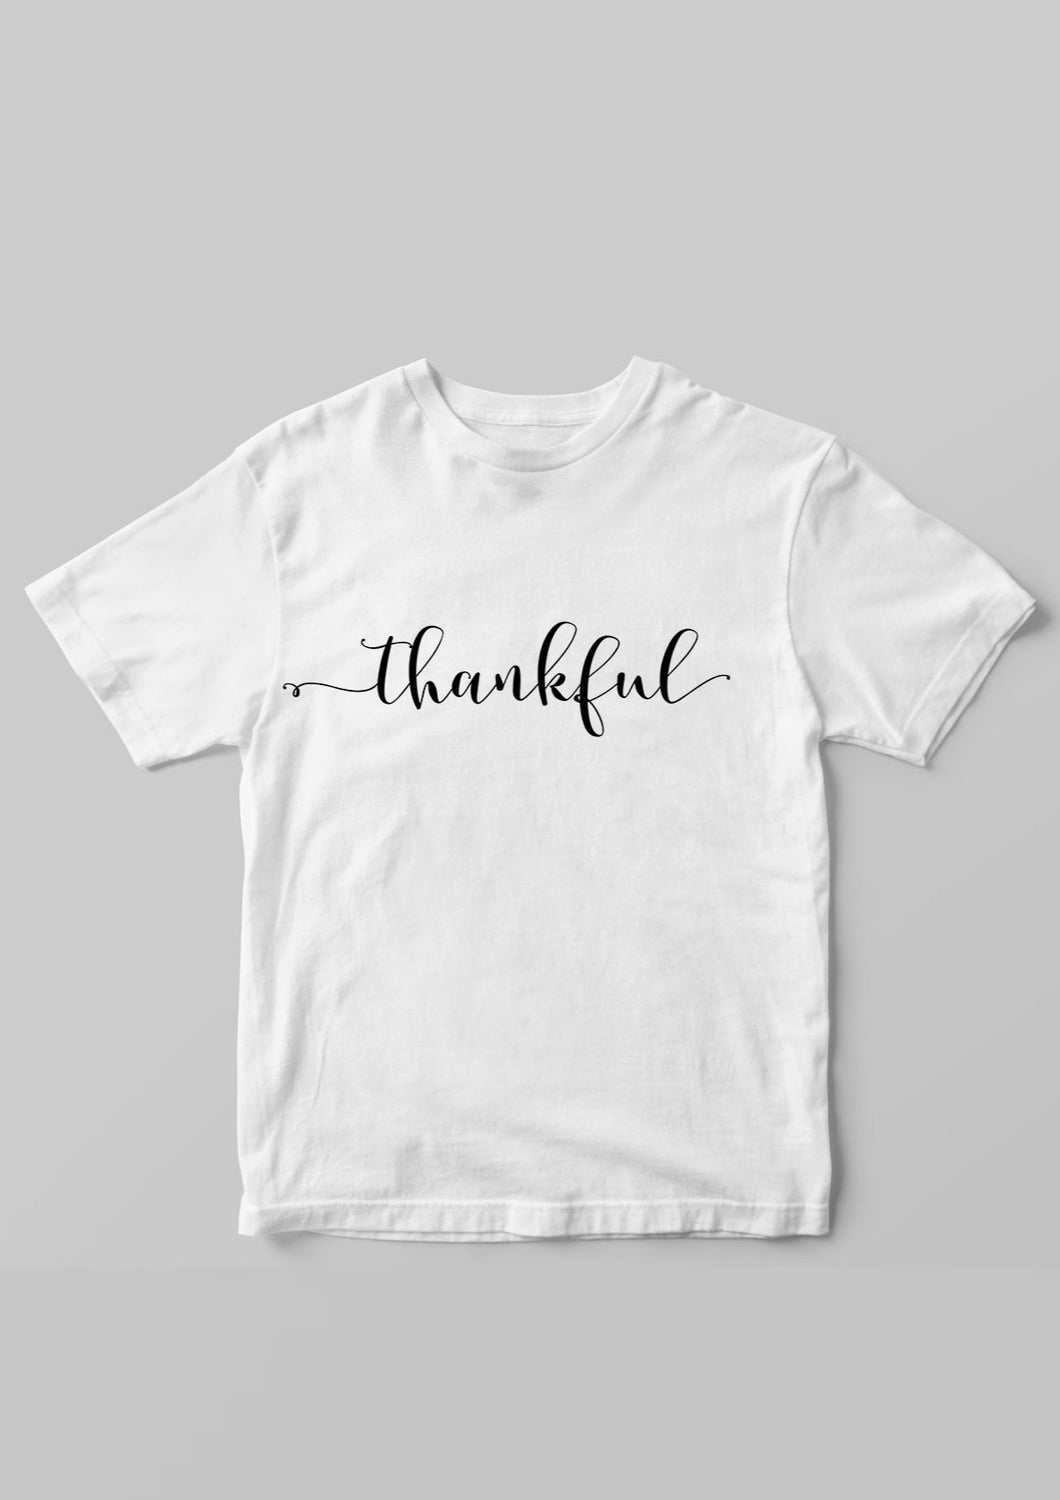 Thankful - Kid's + Toddler Onesies and Tees